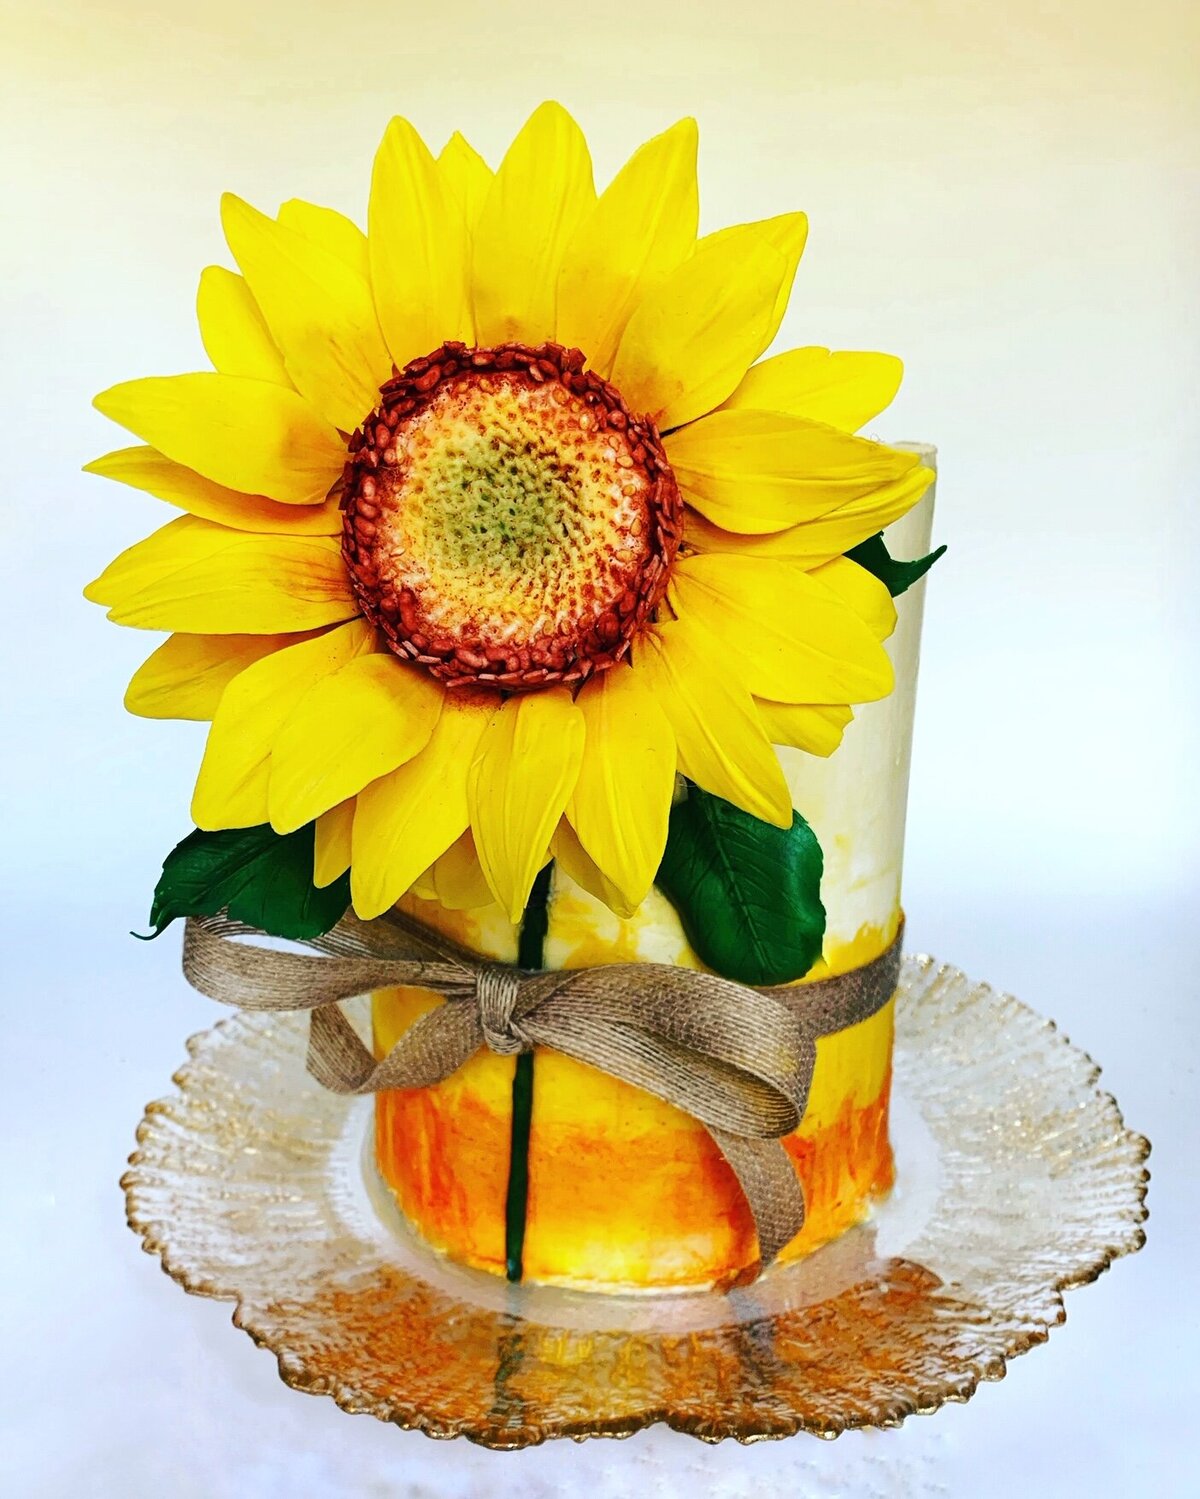 Lemon coconut cake filled with passion fruit curd. Hand-painted buttercream finish in shades of orange and yellow. Decorated with large single handcrafted gumpaste sunflower and burlap bow